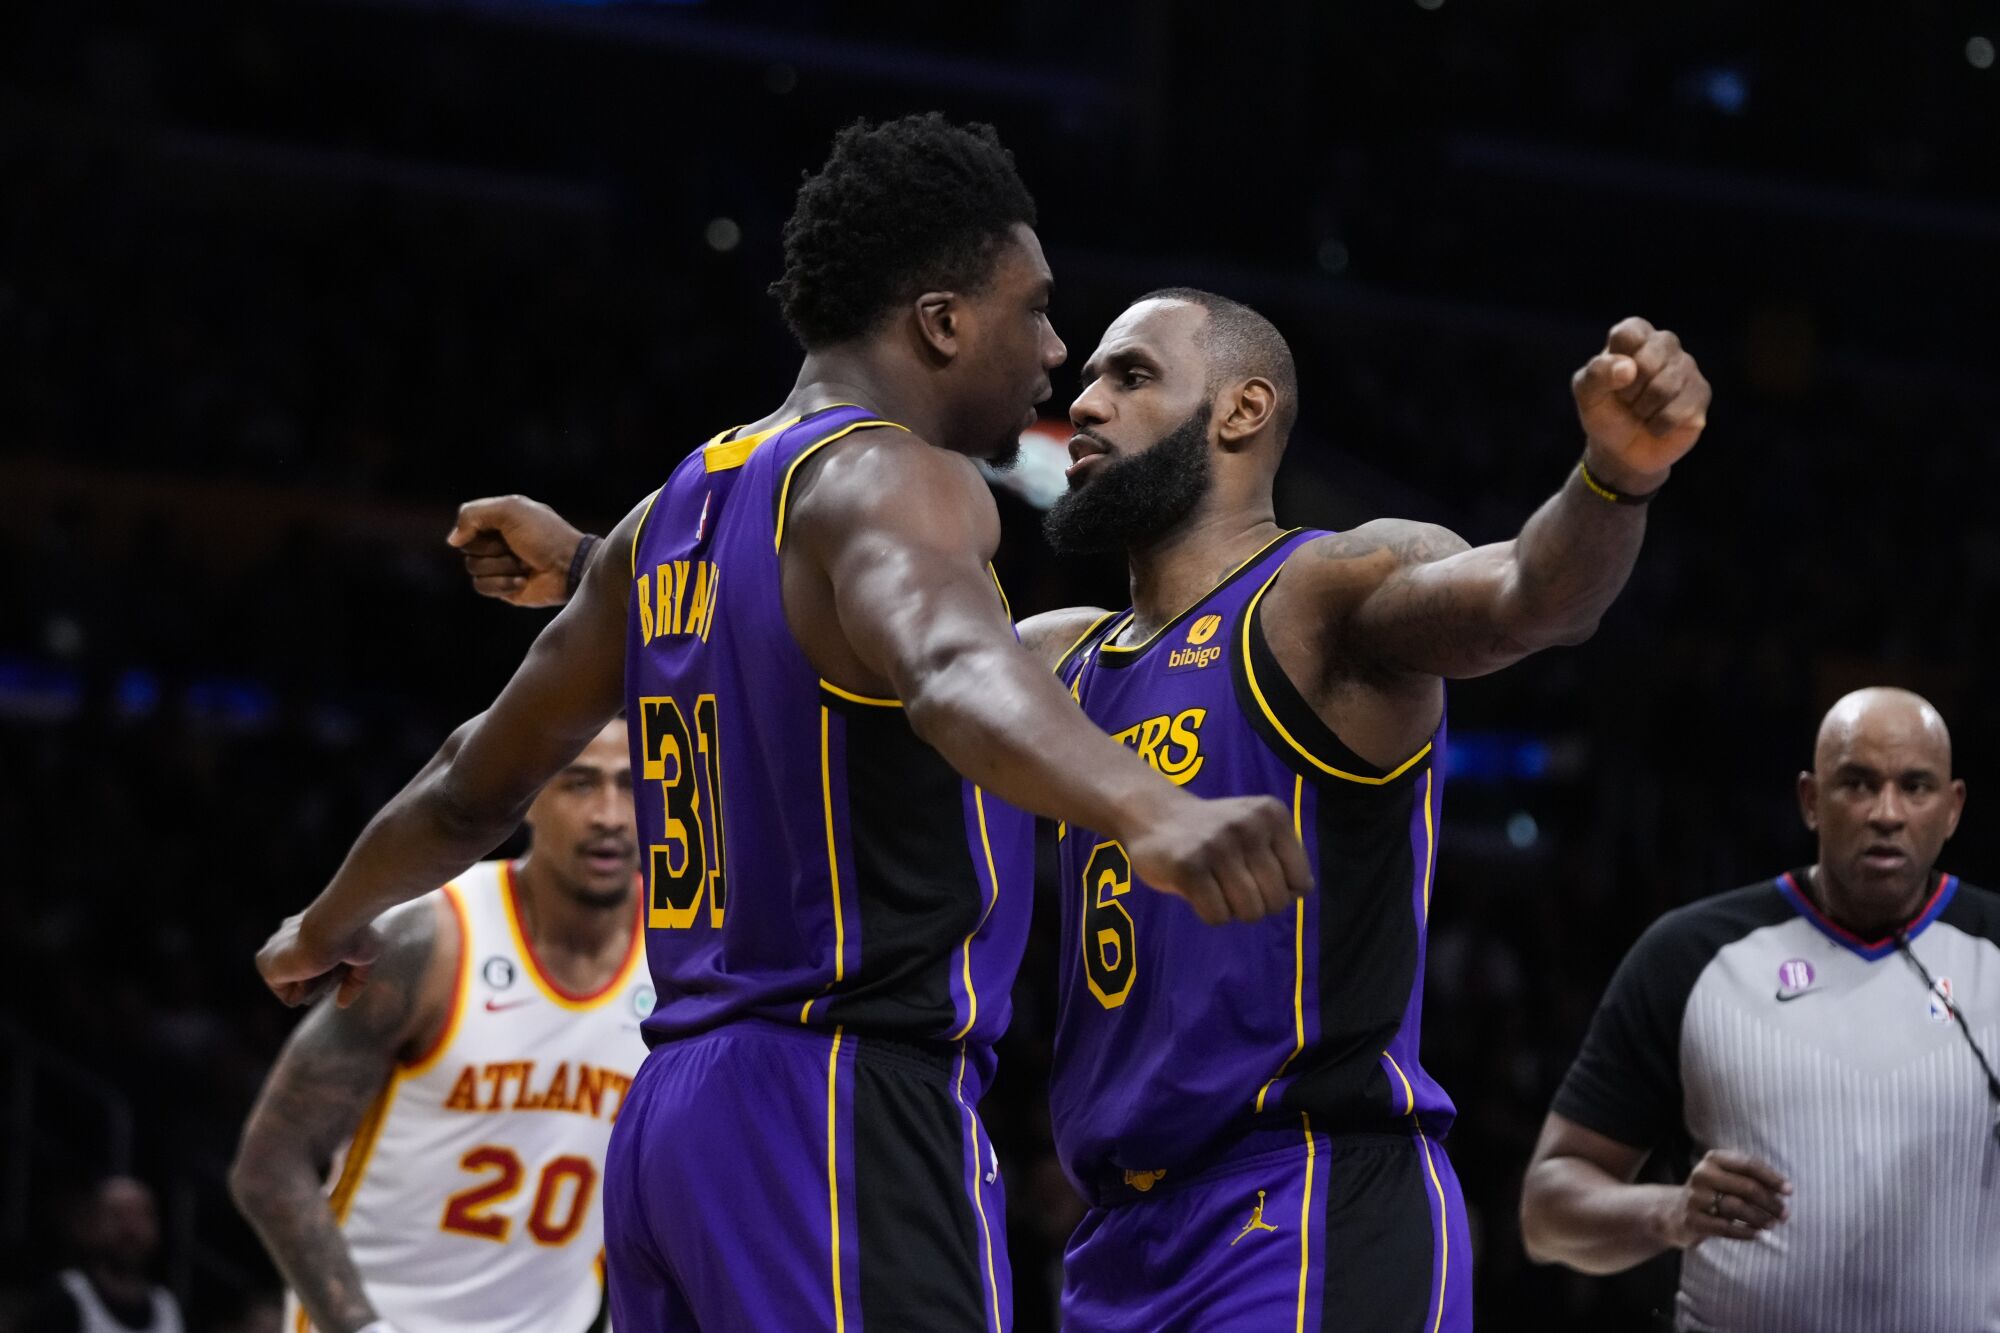 Lakers center Thomas Bryant (31) and forward LeBron James bump chests after Bryant scored a basket.